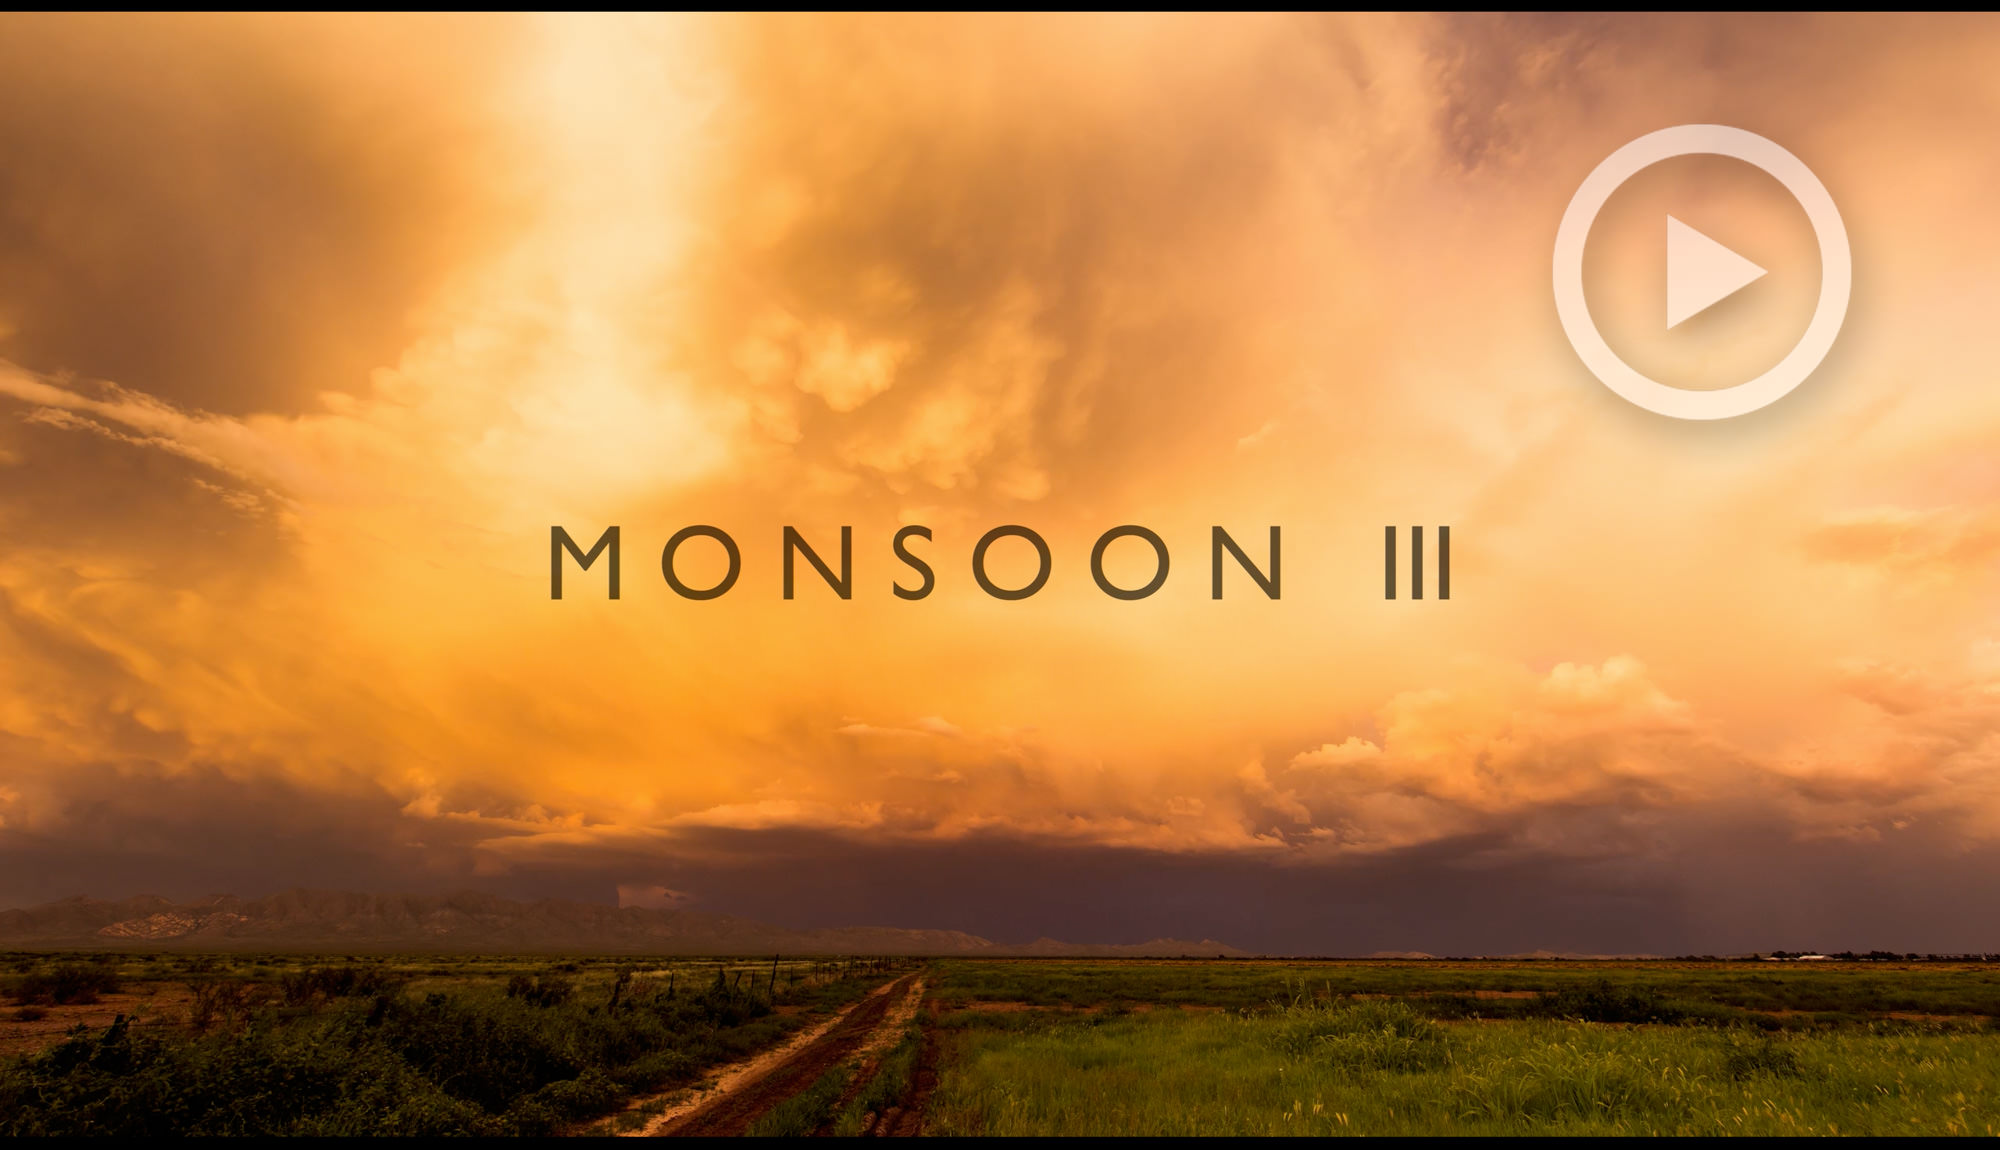 Monsoon III (4K) Timelapse | A Storm Chasing Photographer’s Ode To Wild Weather